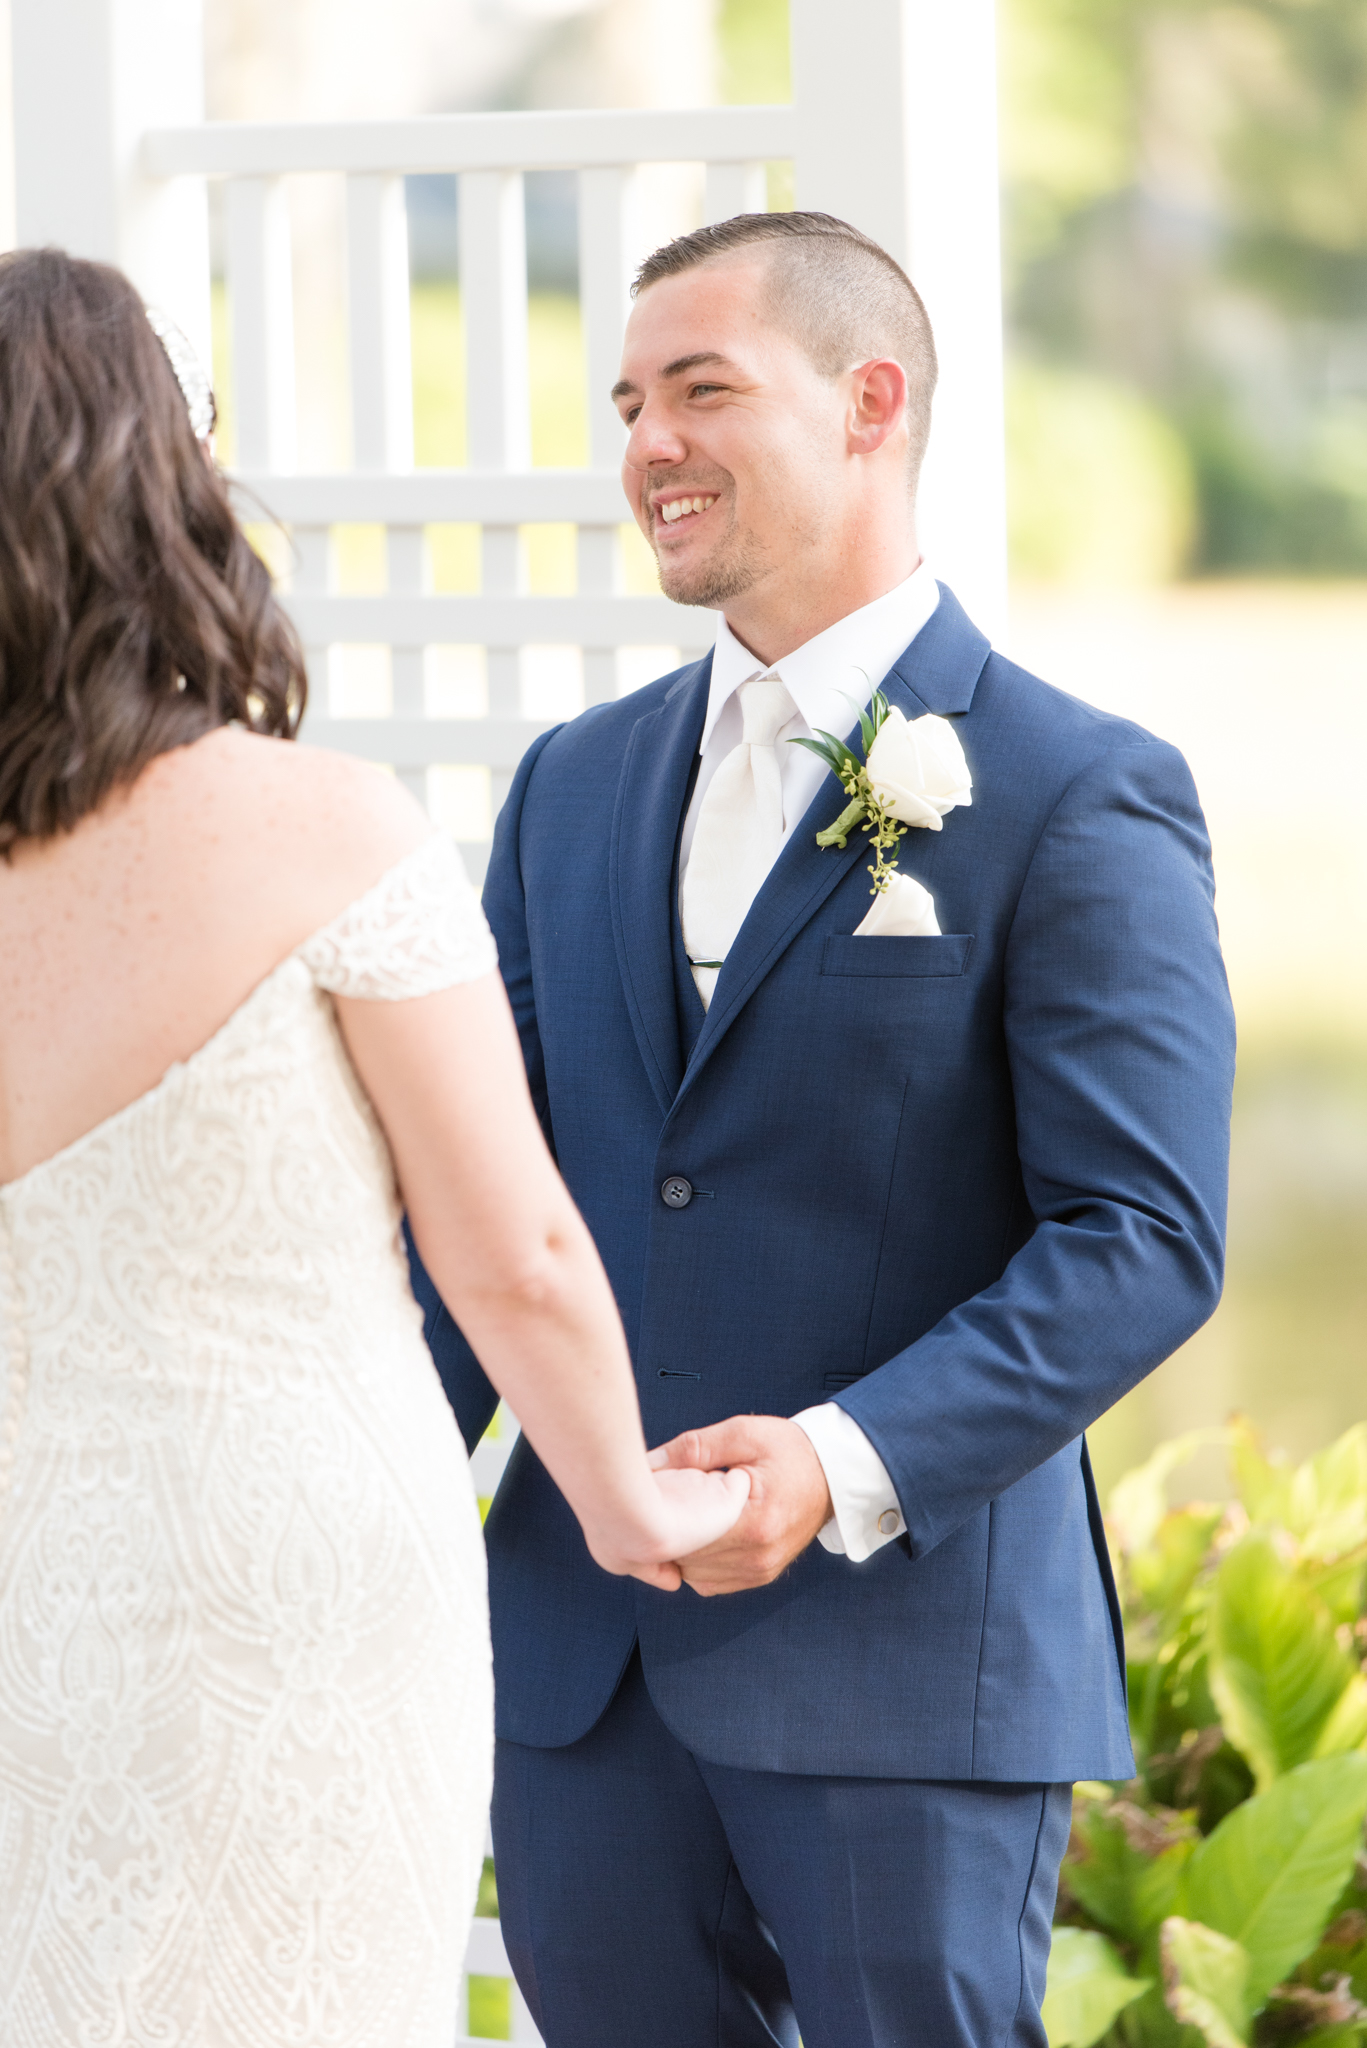 Groom smiles during ceremony.